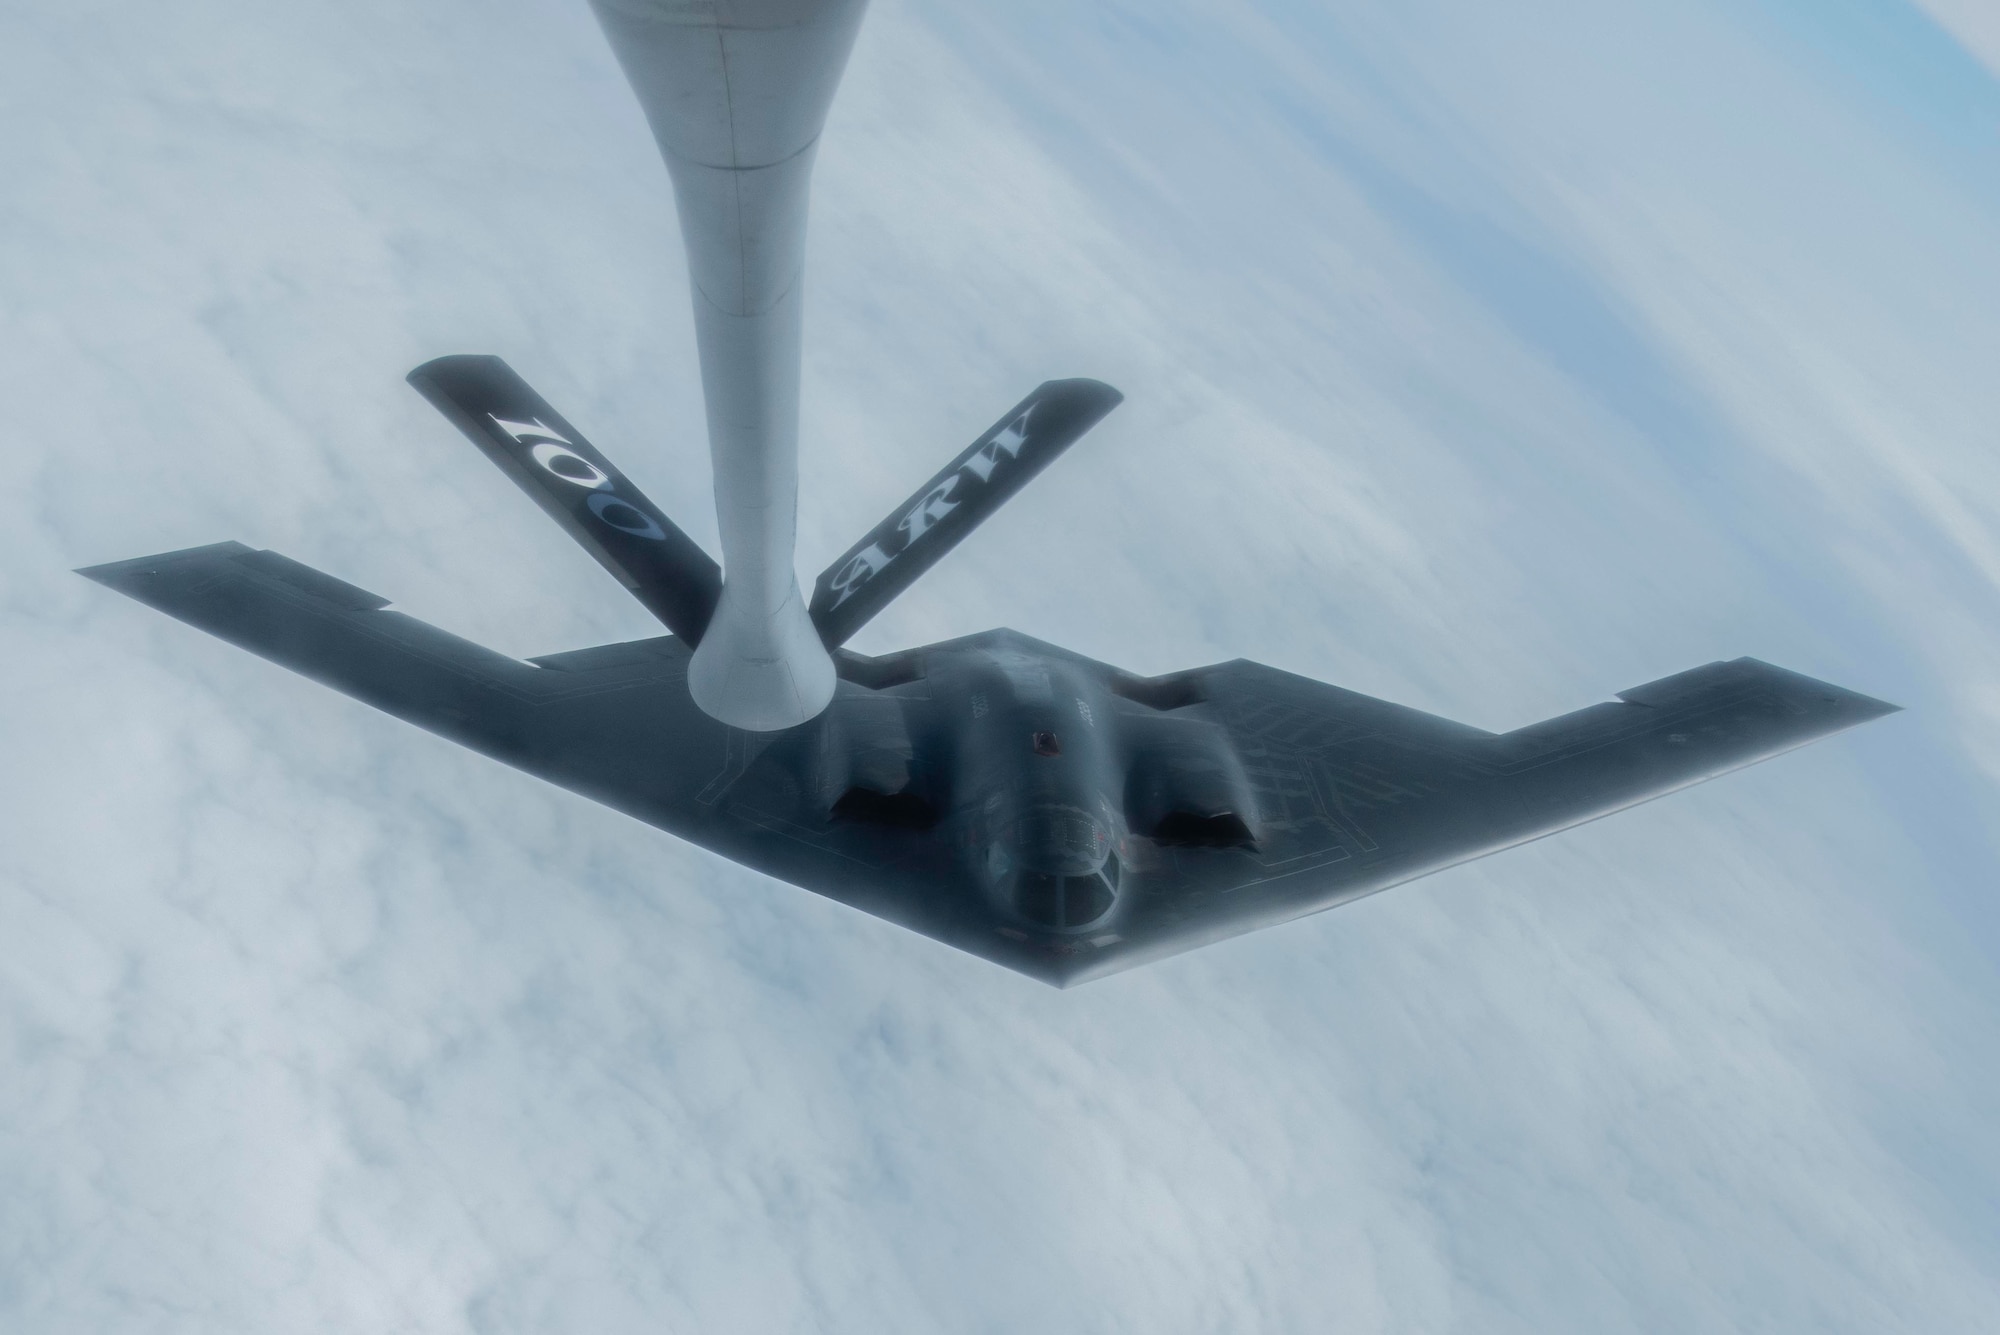 A B-2 Spirit assigned to the 509th Bomb Wing at Whiteman Air Force Base, Missouri, departs after refueling with a KC-135 Stratotanker assigned to the 100th Air Refueling Wing, RAF Mildenhall, England, June 18, 2020. The aerial refueling was conducted in support of a strategic bomber mission north of the Arctic Circle.  (U.S. Air Force photo by Airman 1st Class Joseph Barron)